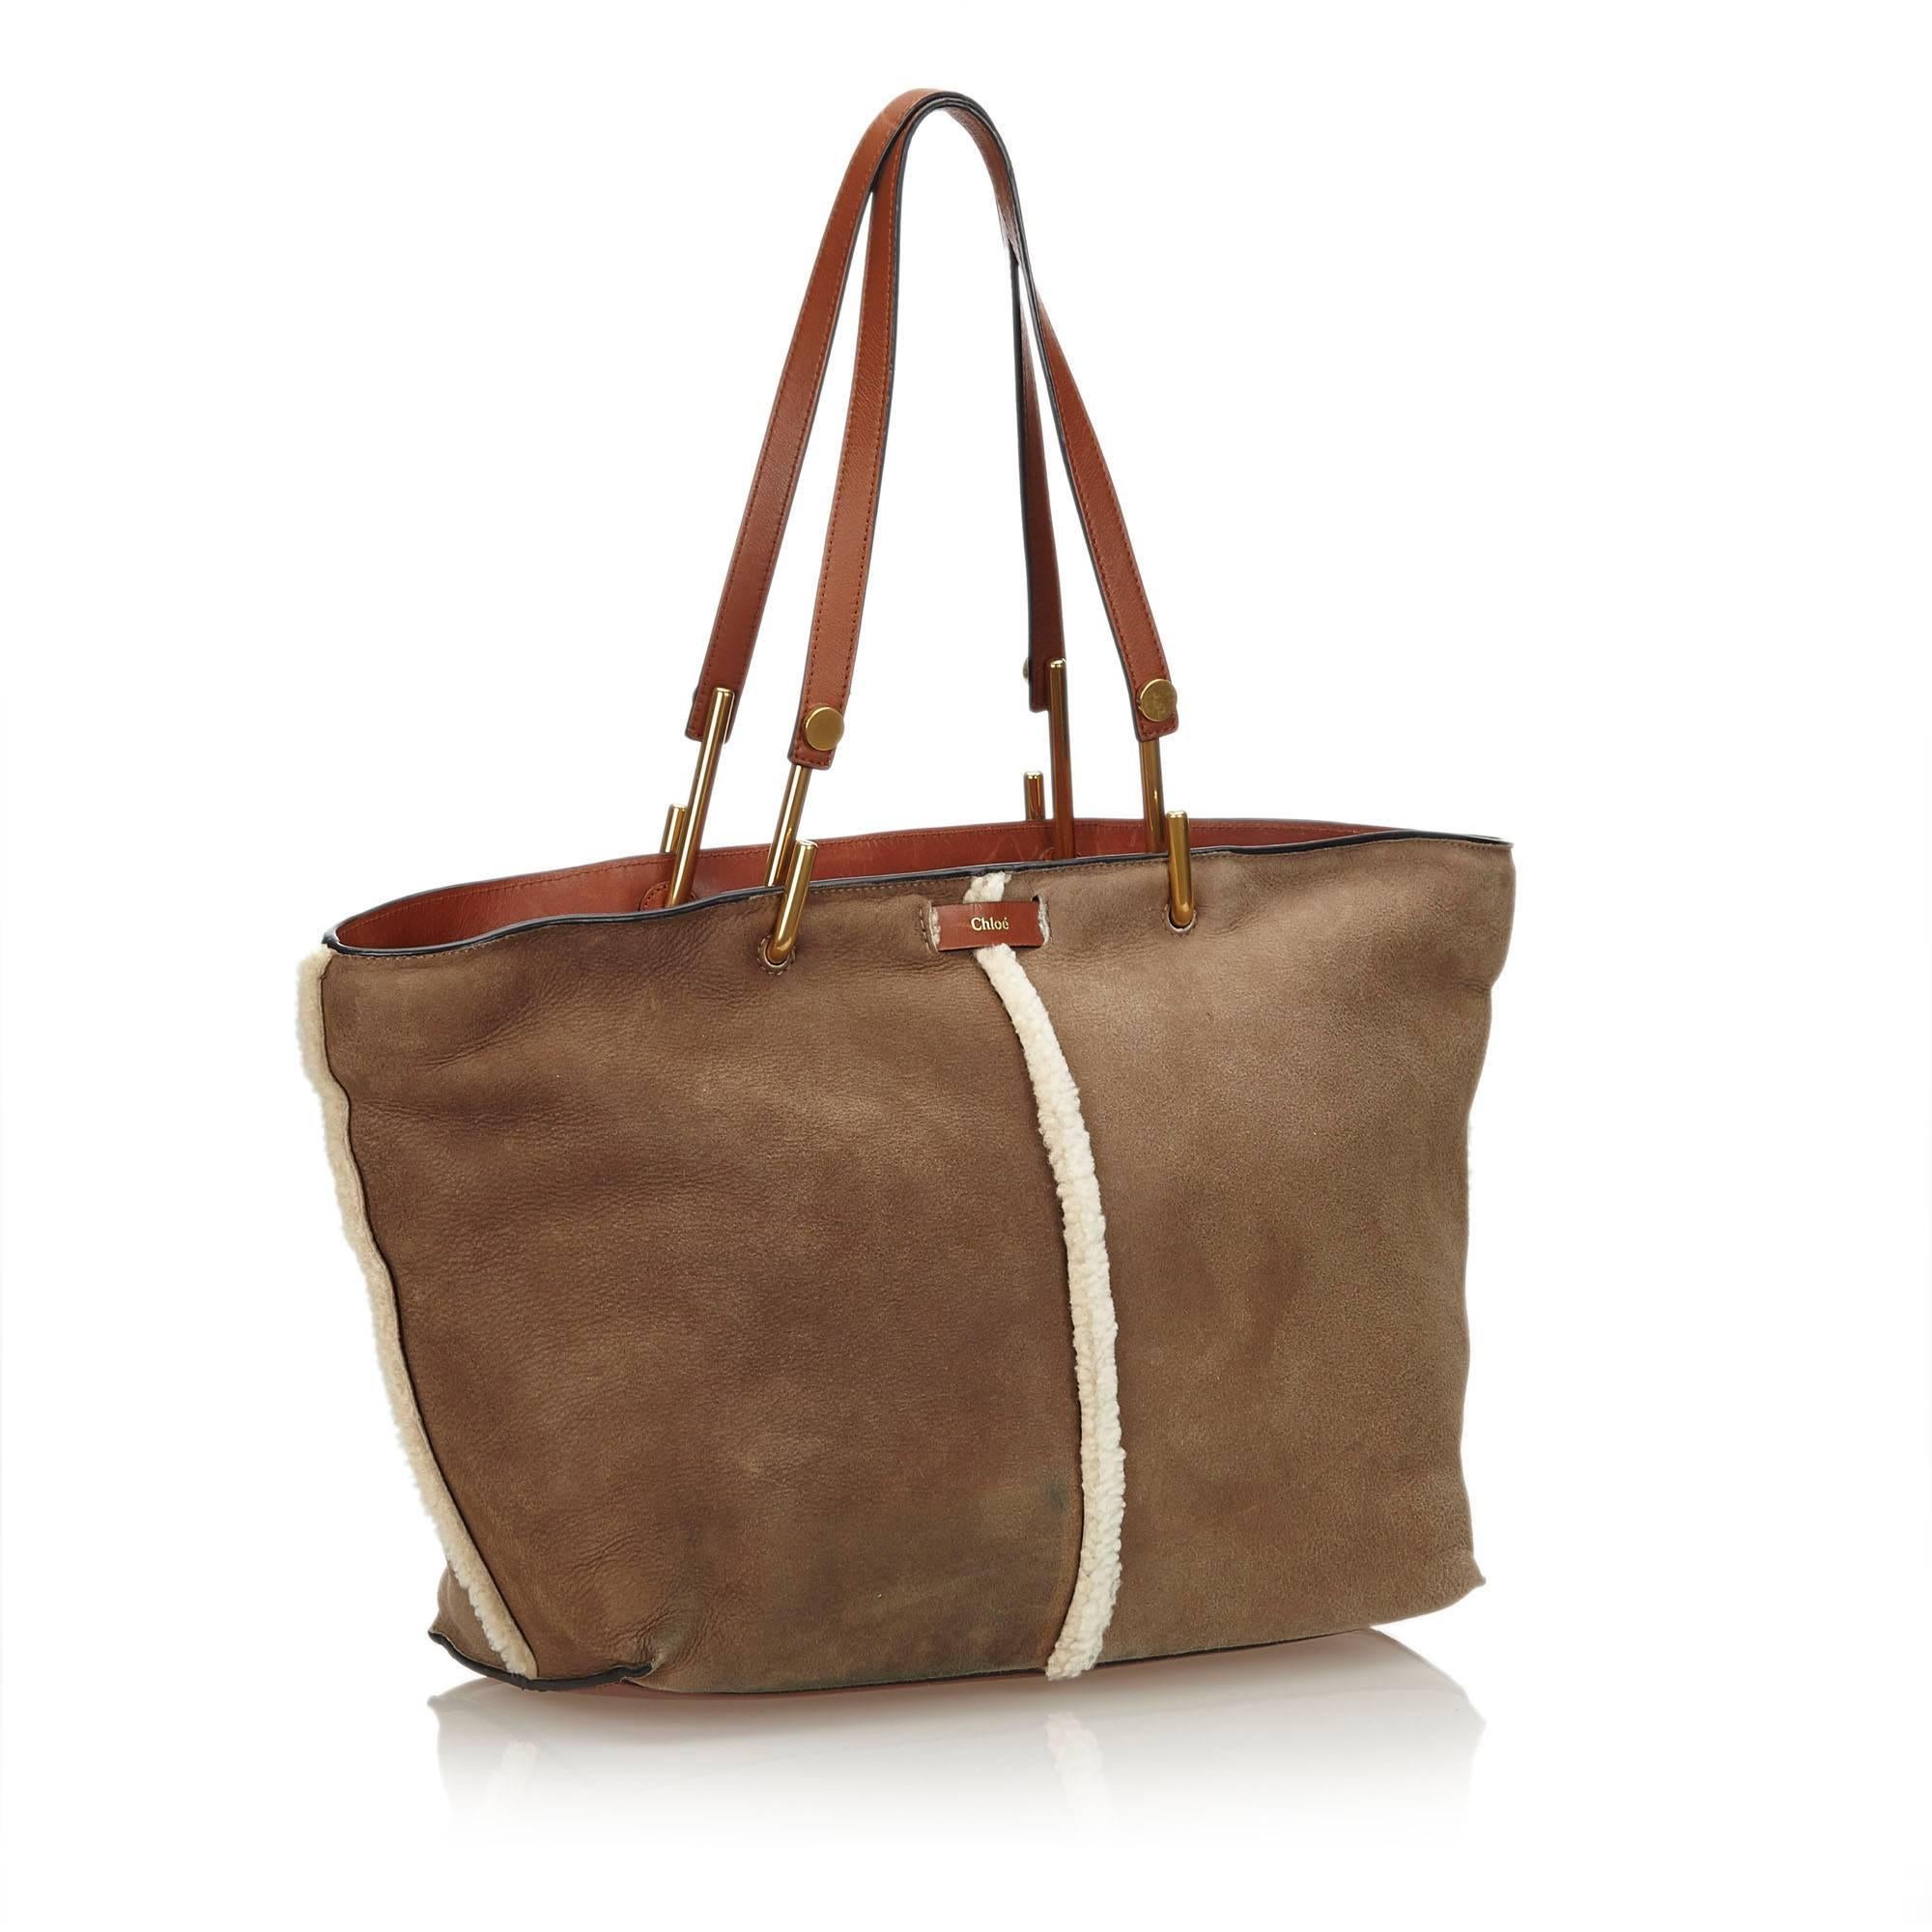 This Keri tote bag features a leather body with mouton trim, flat leather straps, top zip closure, and interior zip pocket. 

It carries a B condition rating. 

Dimensions: 
Length 35 cm
Width 26 cm
Depth 12 cm
Shoulder Drop 25 cm

Inclusions: Dust